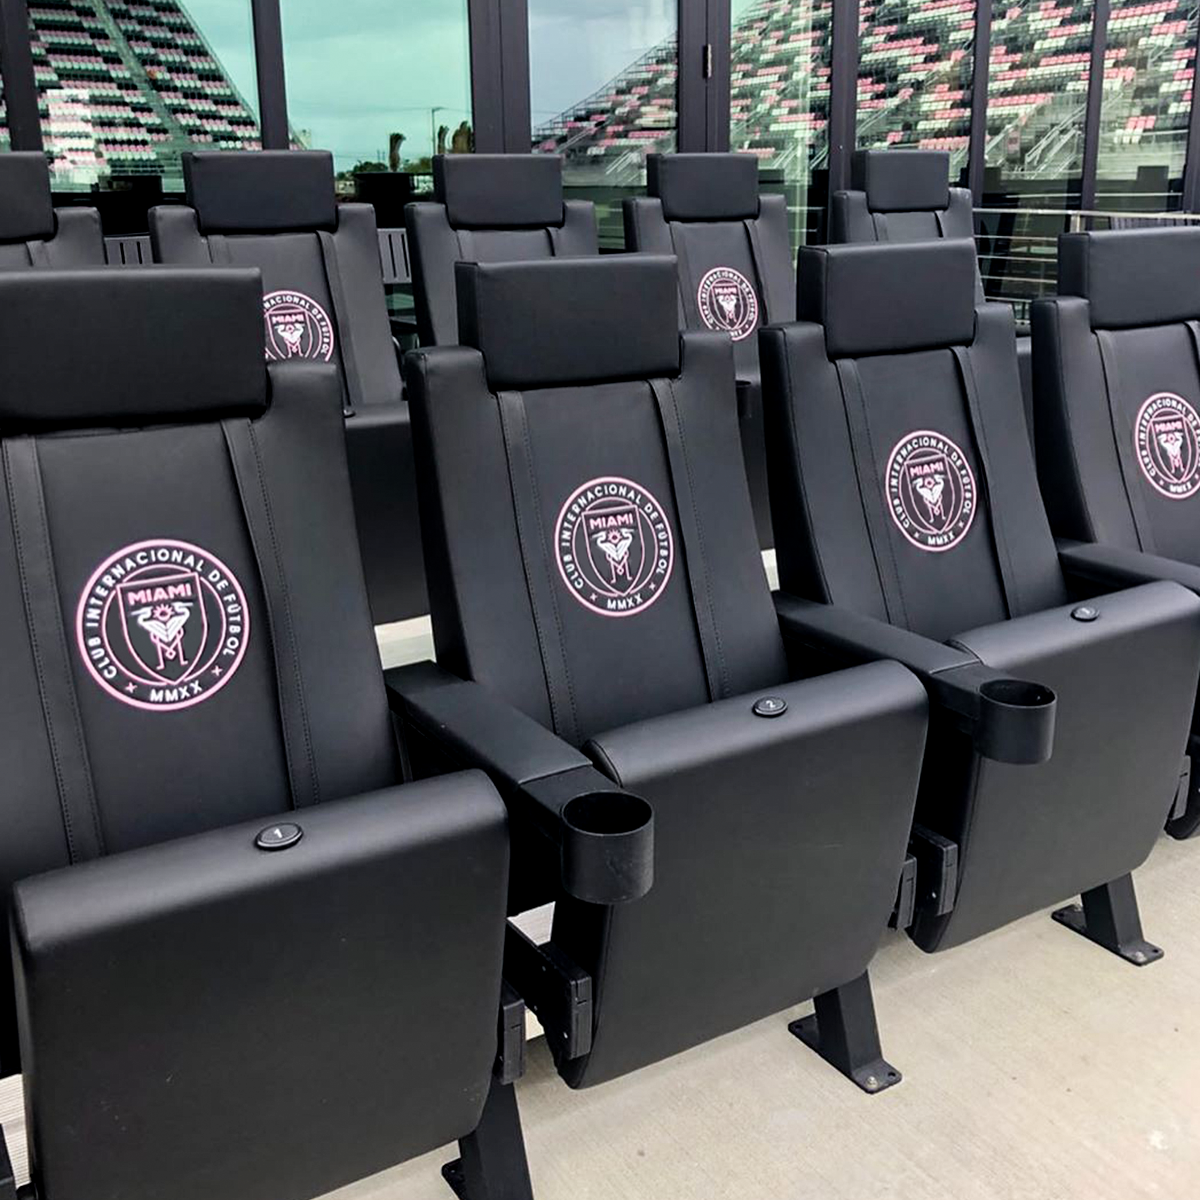 SuiteMax 3.5 VIP Seats with Houston Oilers Classic Logo